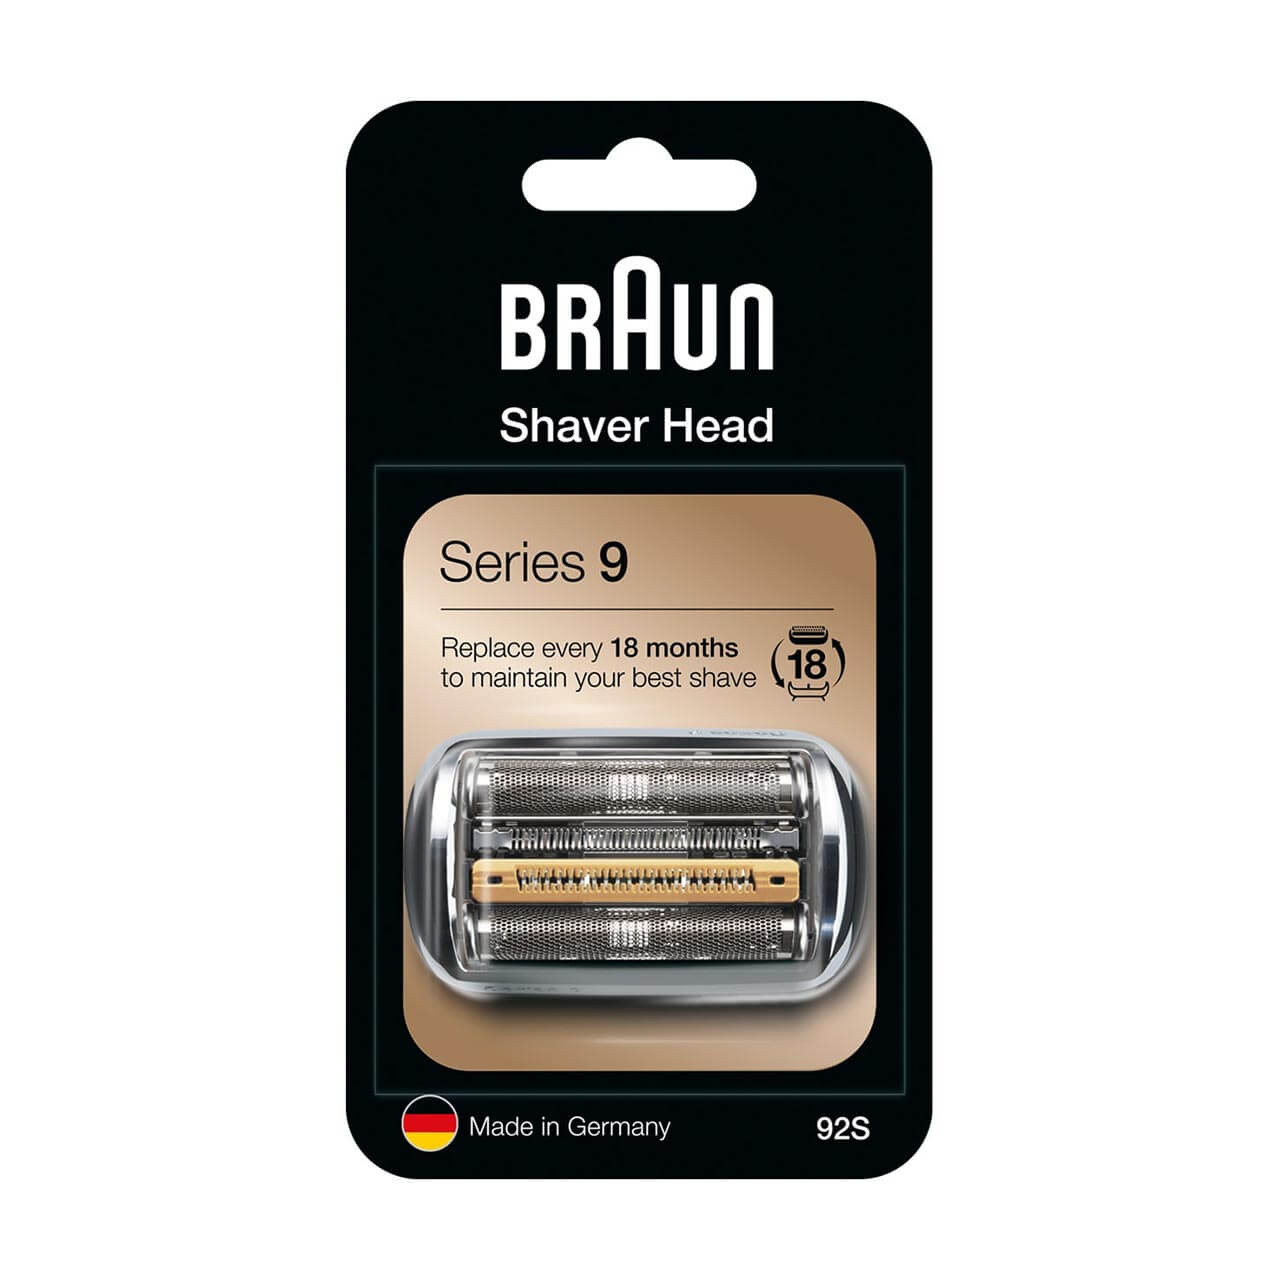 https://cdn11.bigcommerce.com/s-61qnoipi5/images/stencil/1280x1280/products/184/875/01_Braun_Series-9_92s-shavers-replacement-parts_1280x1280__06848.1616713222.jpg?c=2